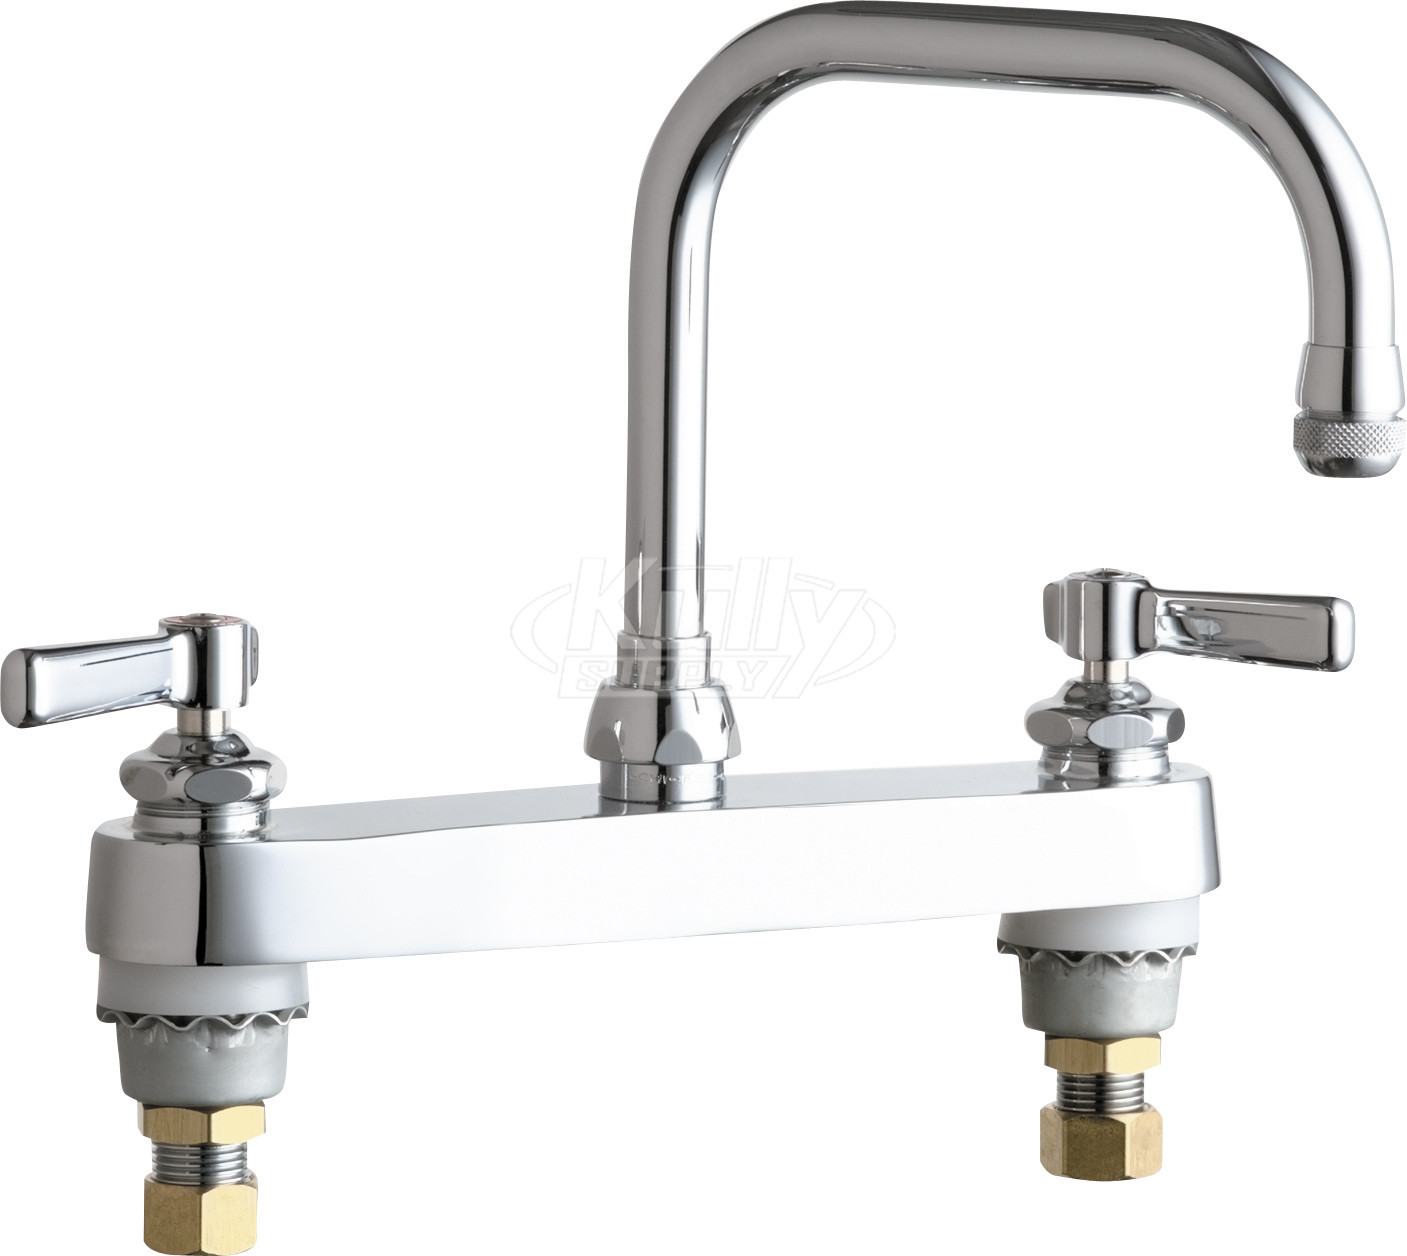 Chicago 527-ABCP Hot and Cold Water Sink Faucet